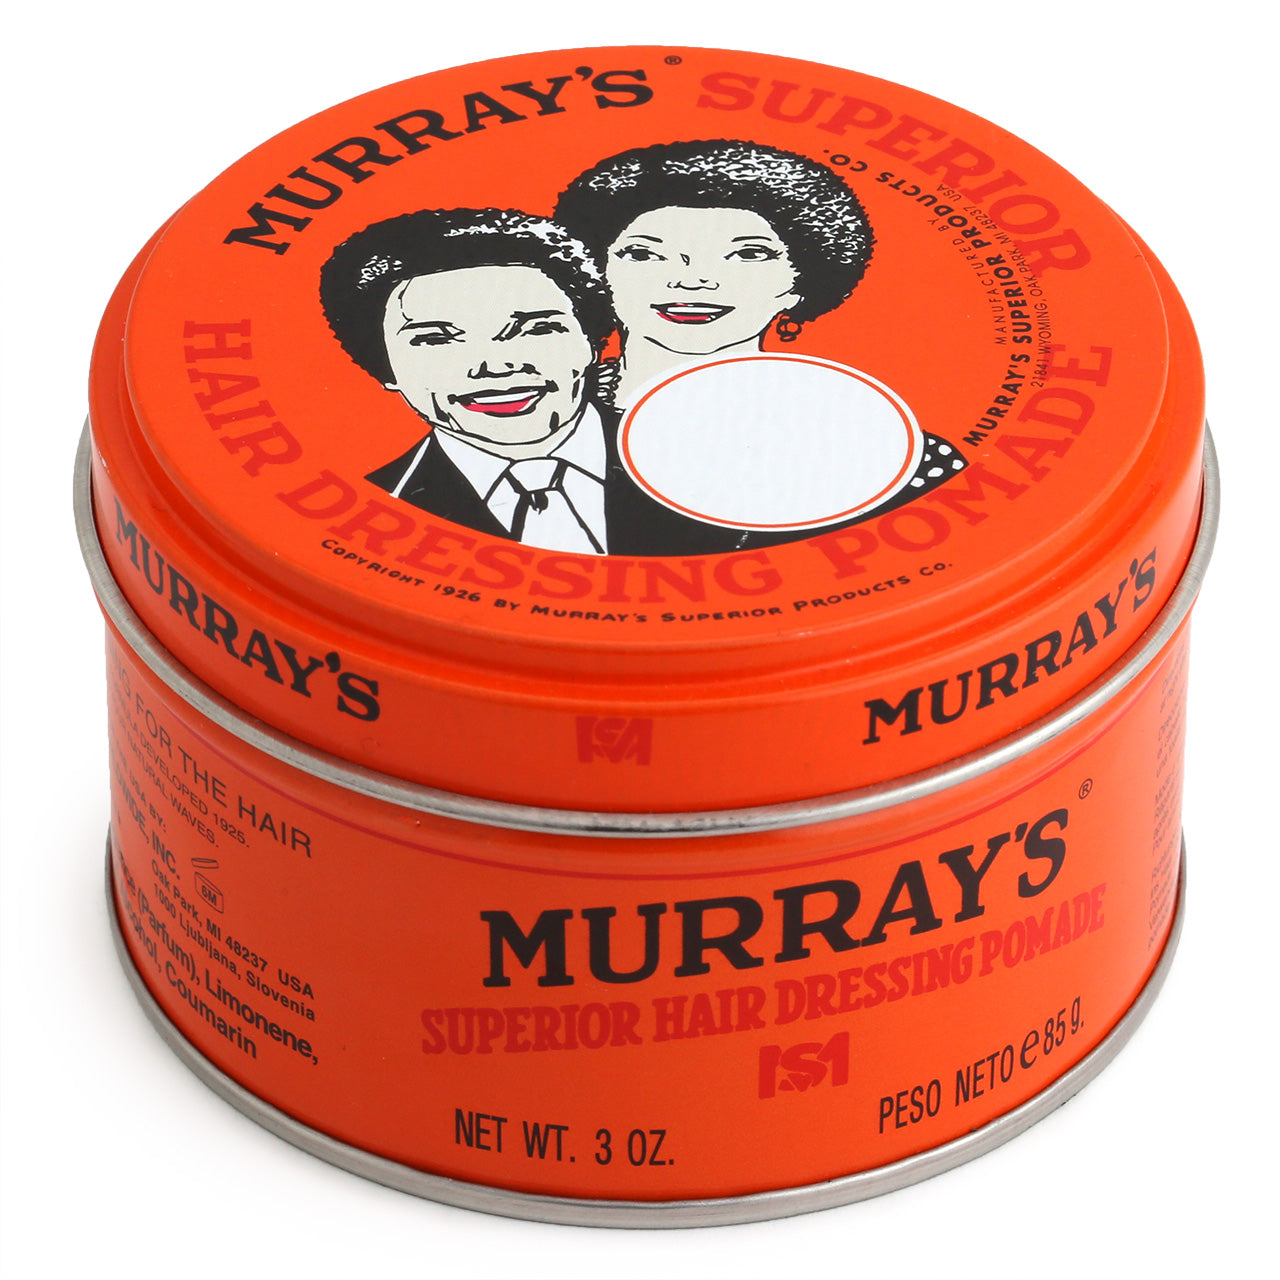 Murrays Superior Hair Dressing Pomade, 85g. Top view